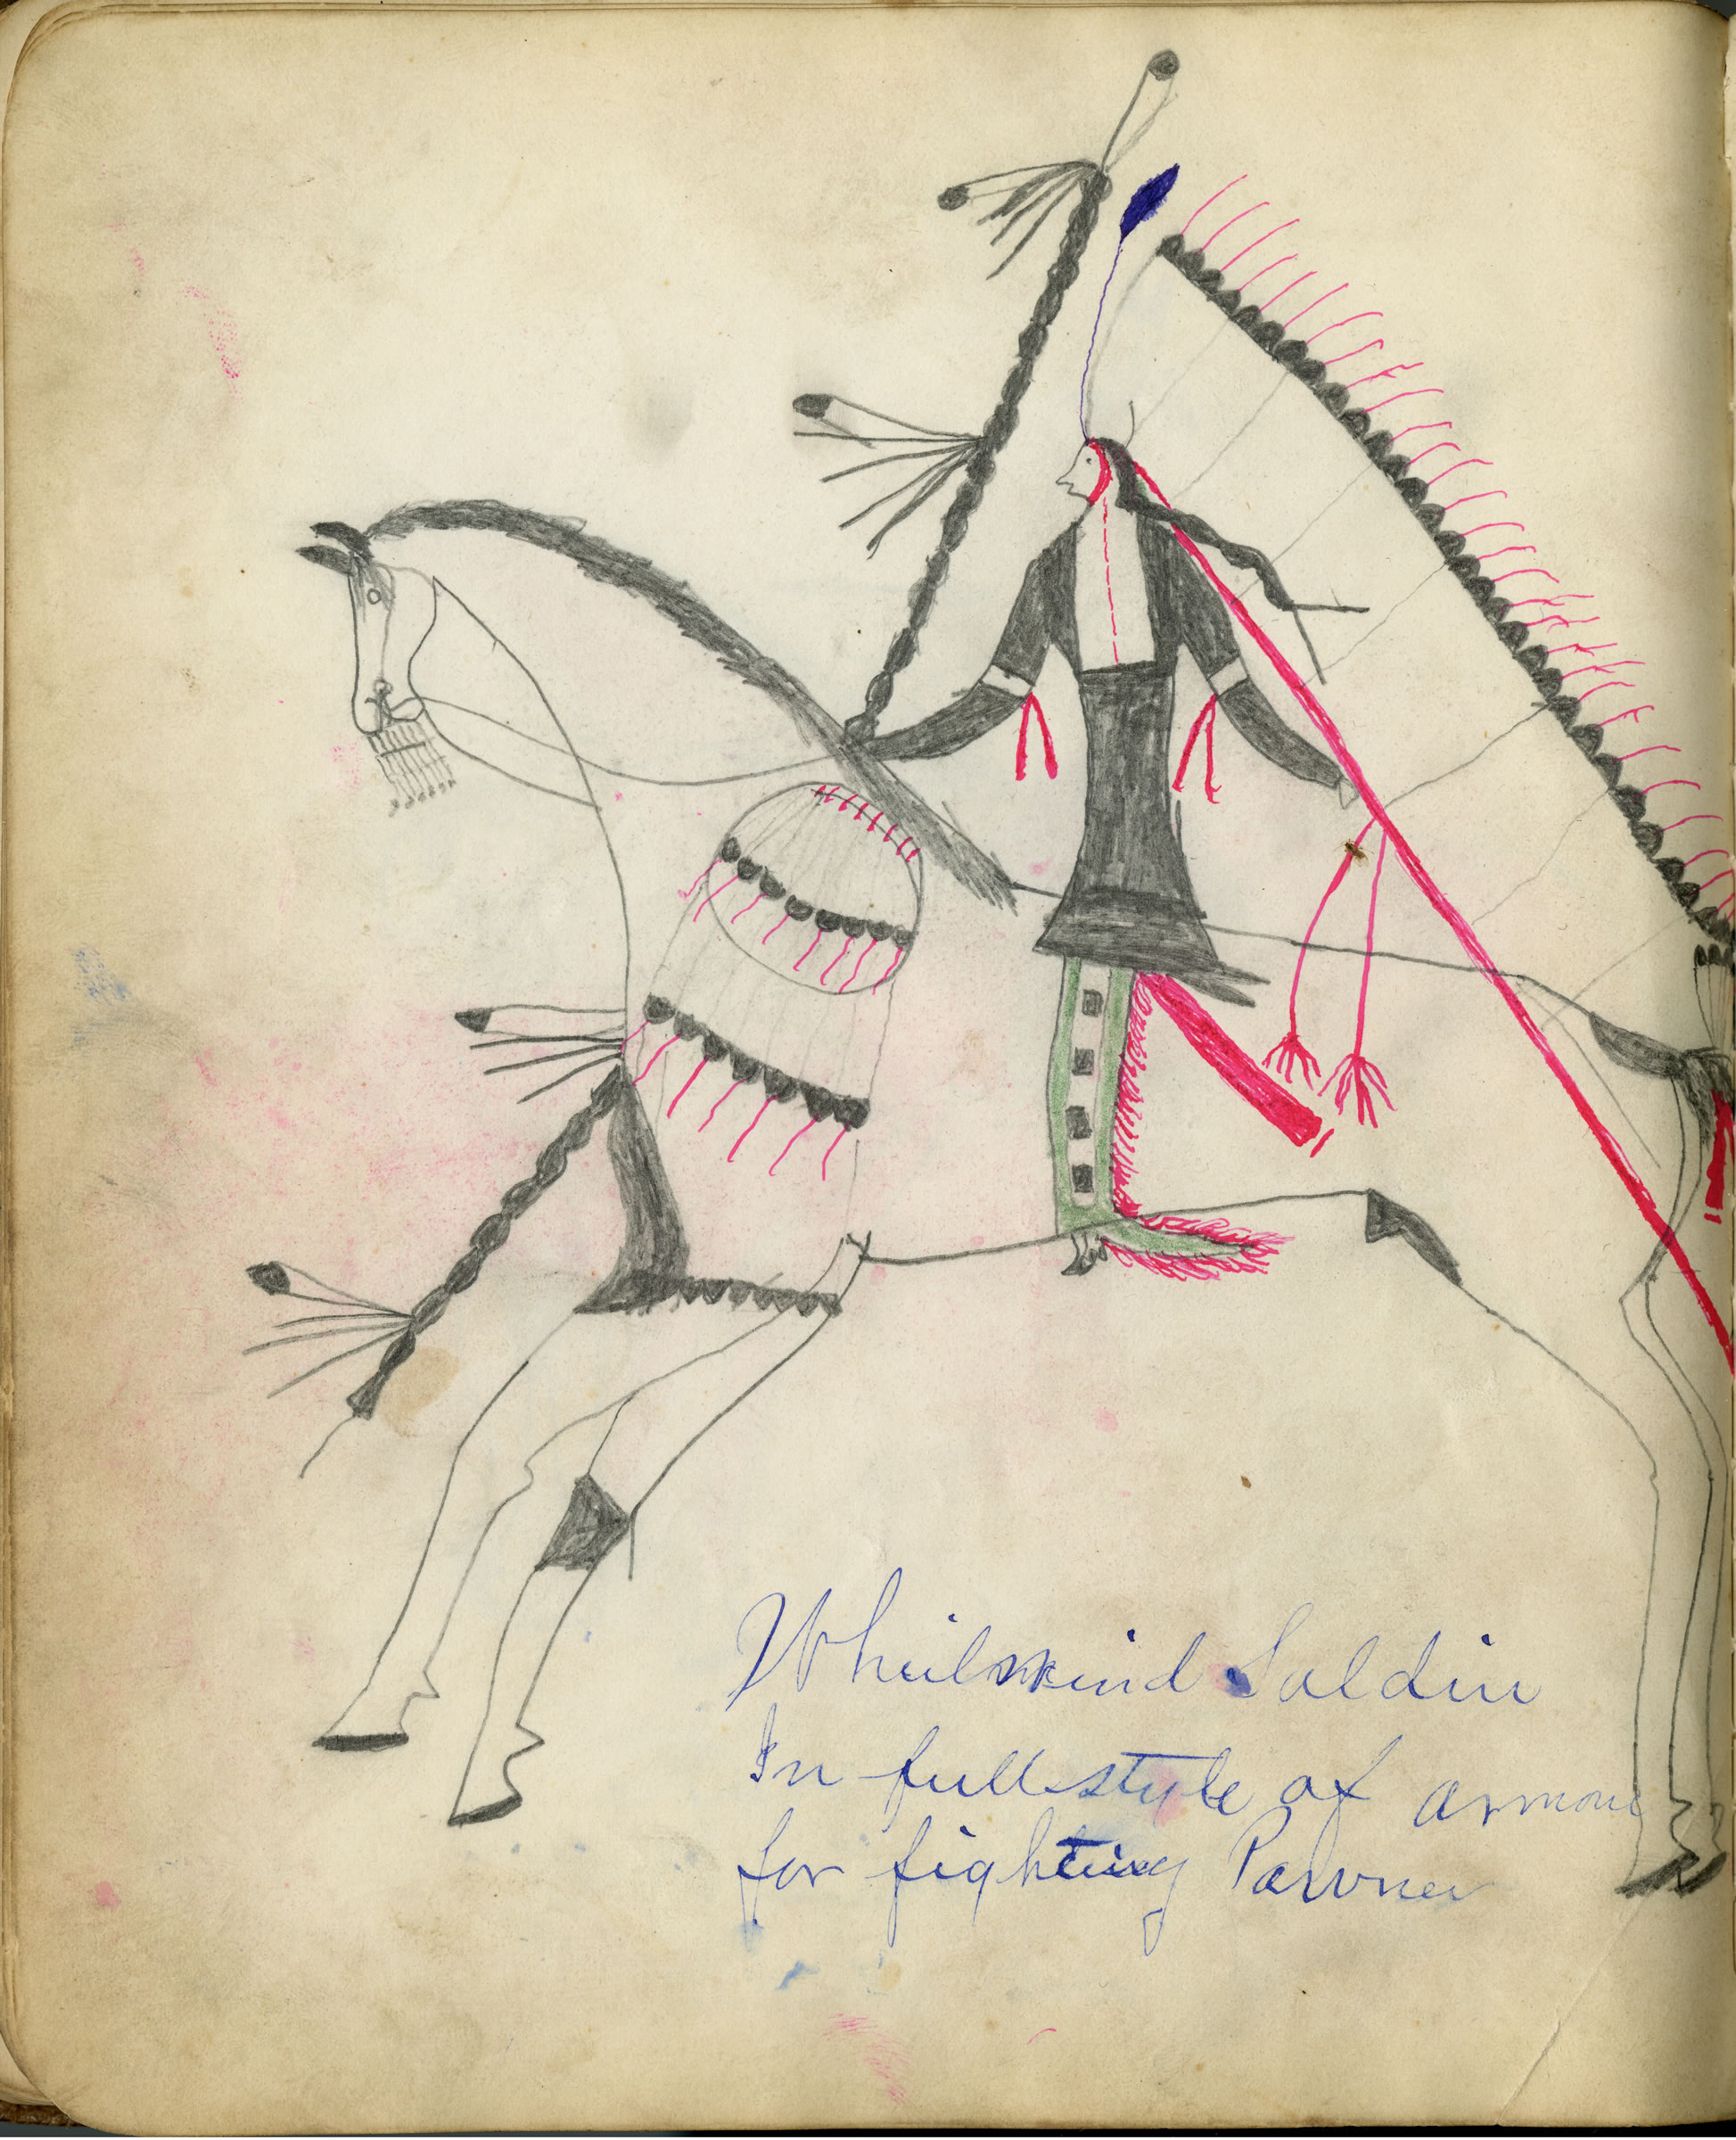 Fales-Freeman Brulé Ledger: Plate 11 Whirlwind Soldier In Full Style of Armor for Fighting Pawnee / Bad Gun In Style of Armor for Fighting Pawnee